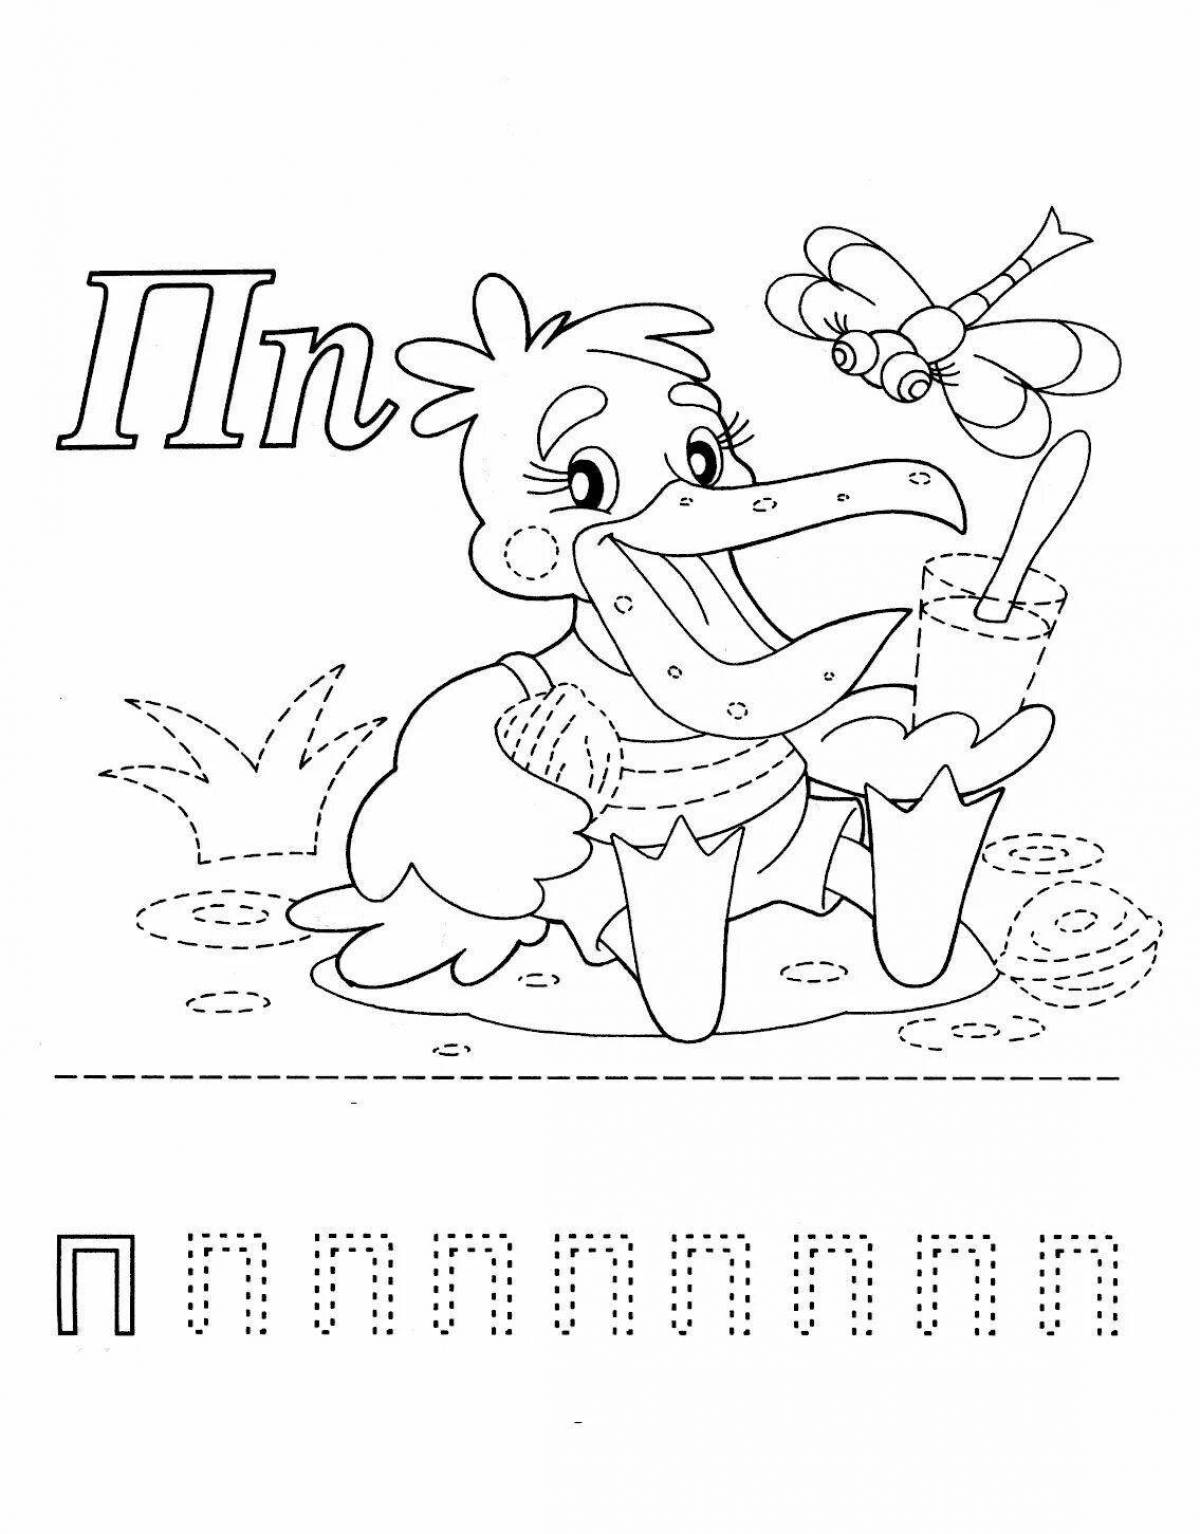 Coloring book with letters of the alphabet for children 5 years old